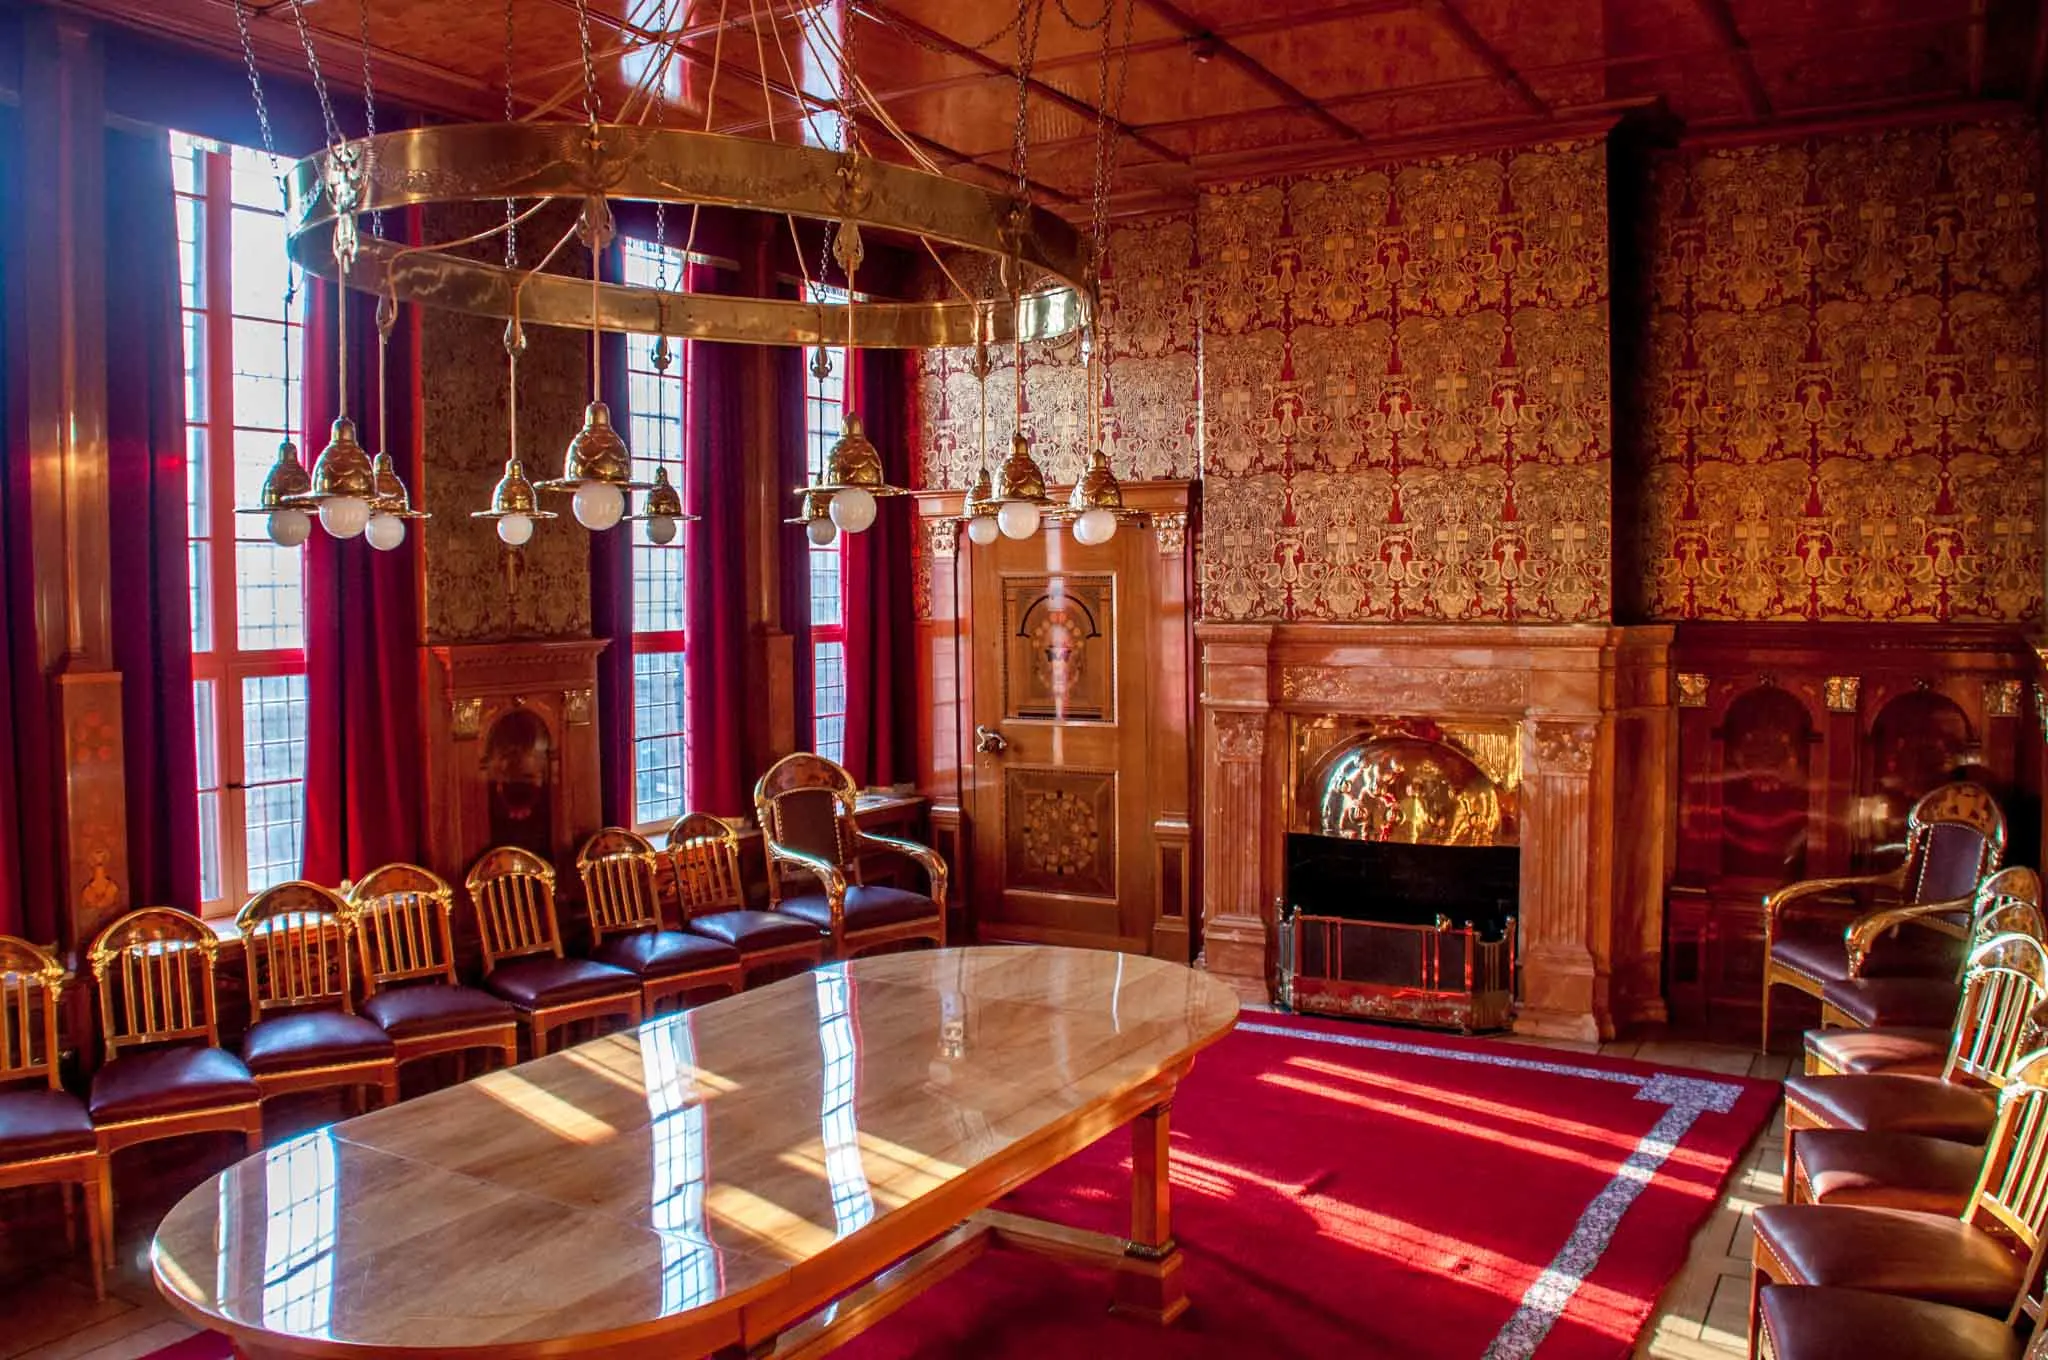 Golden Chamber meeting room decorated in red and gold